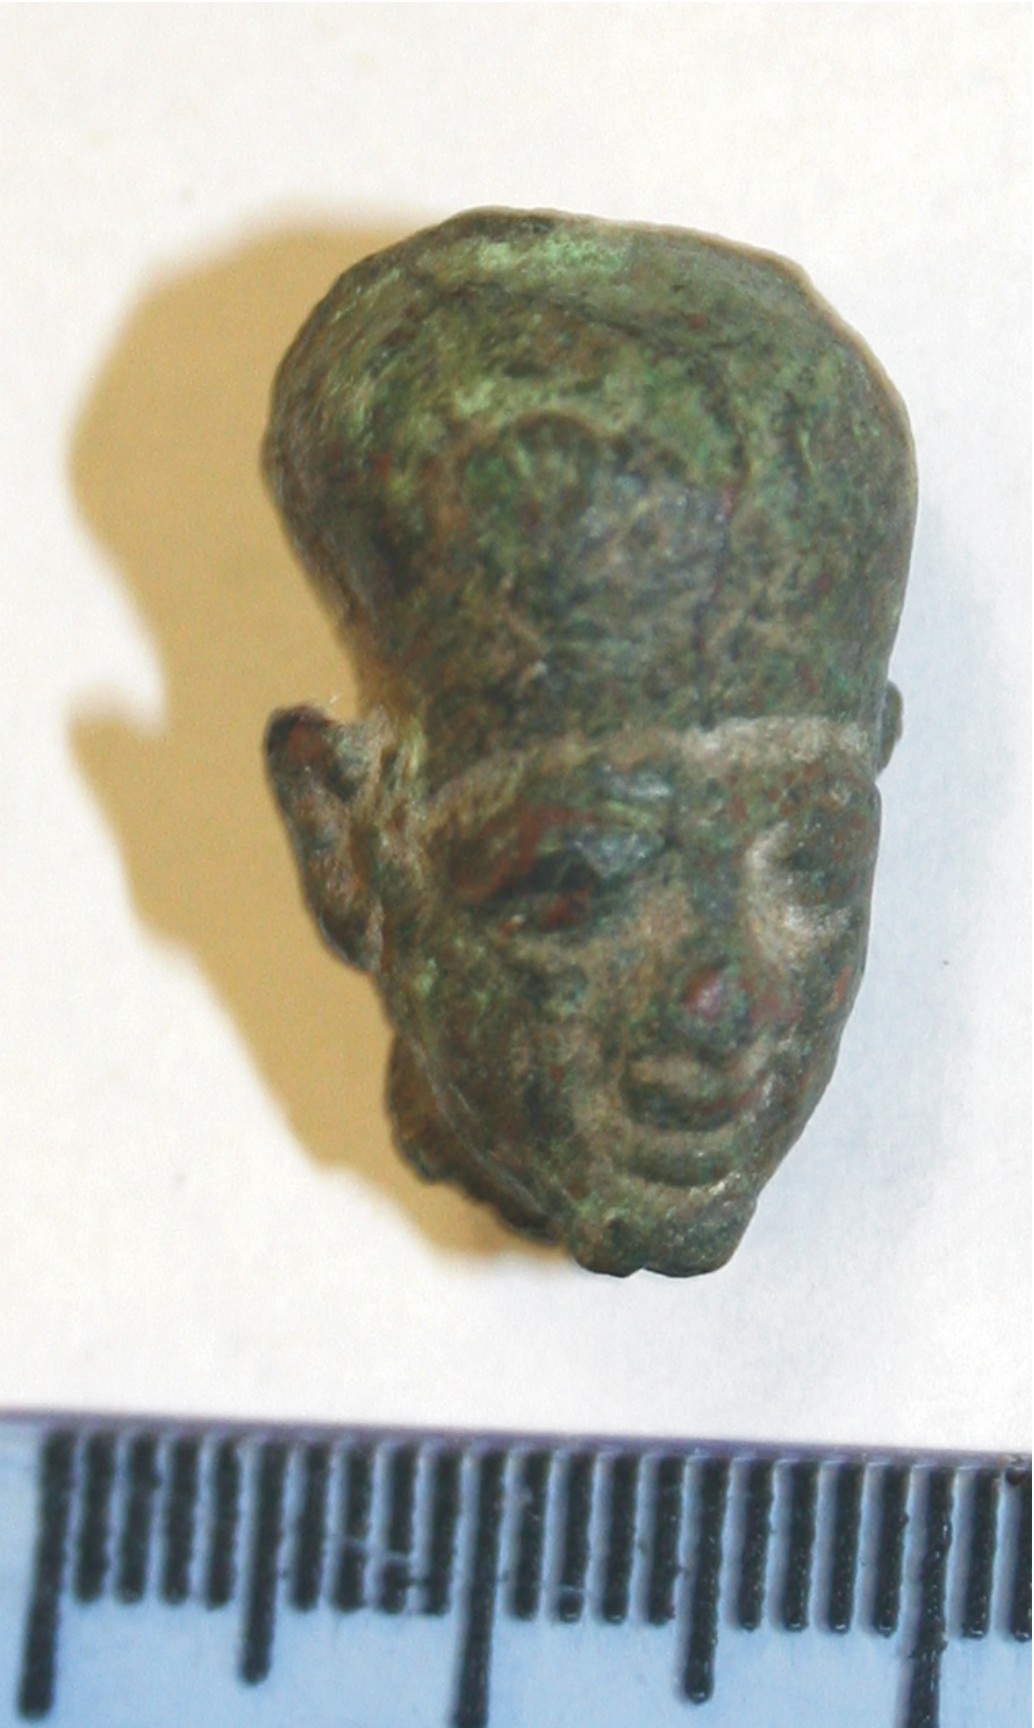 Image for: Copper alloy head